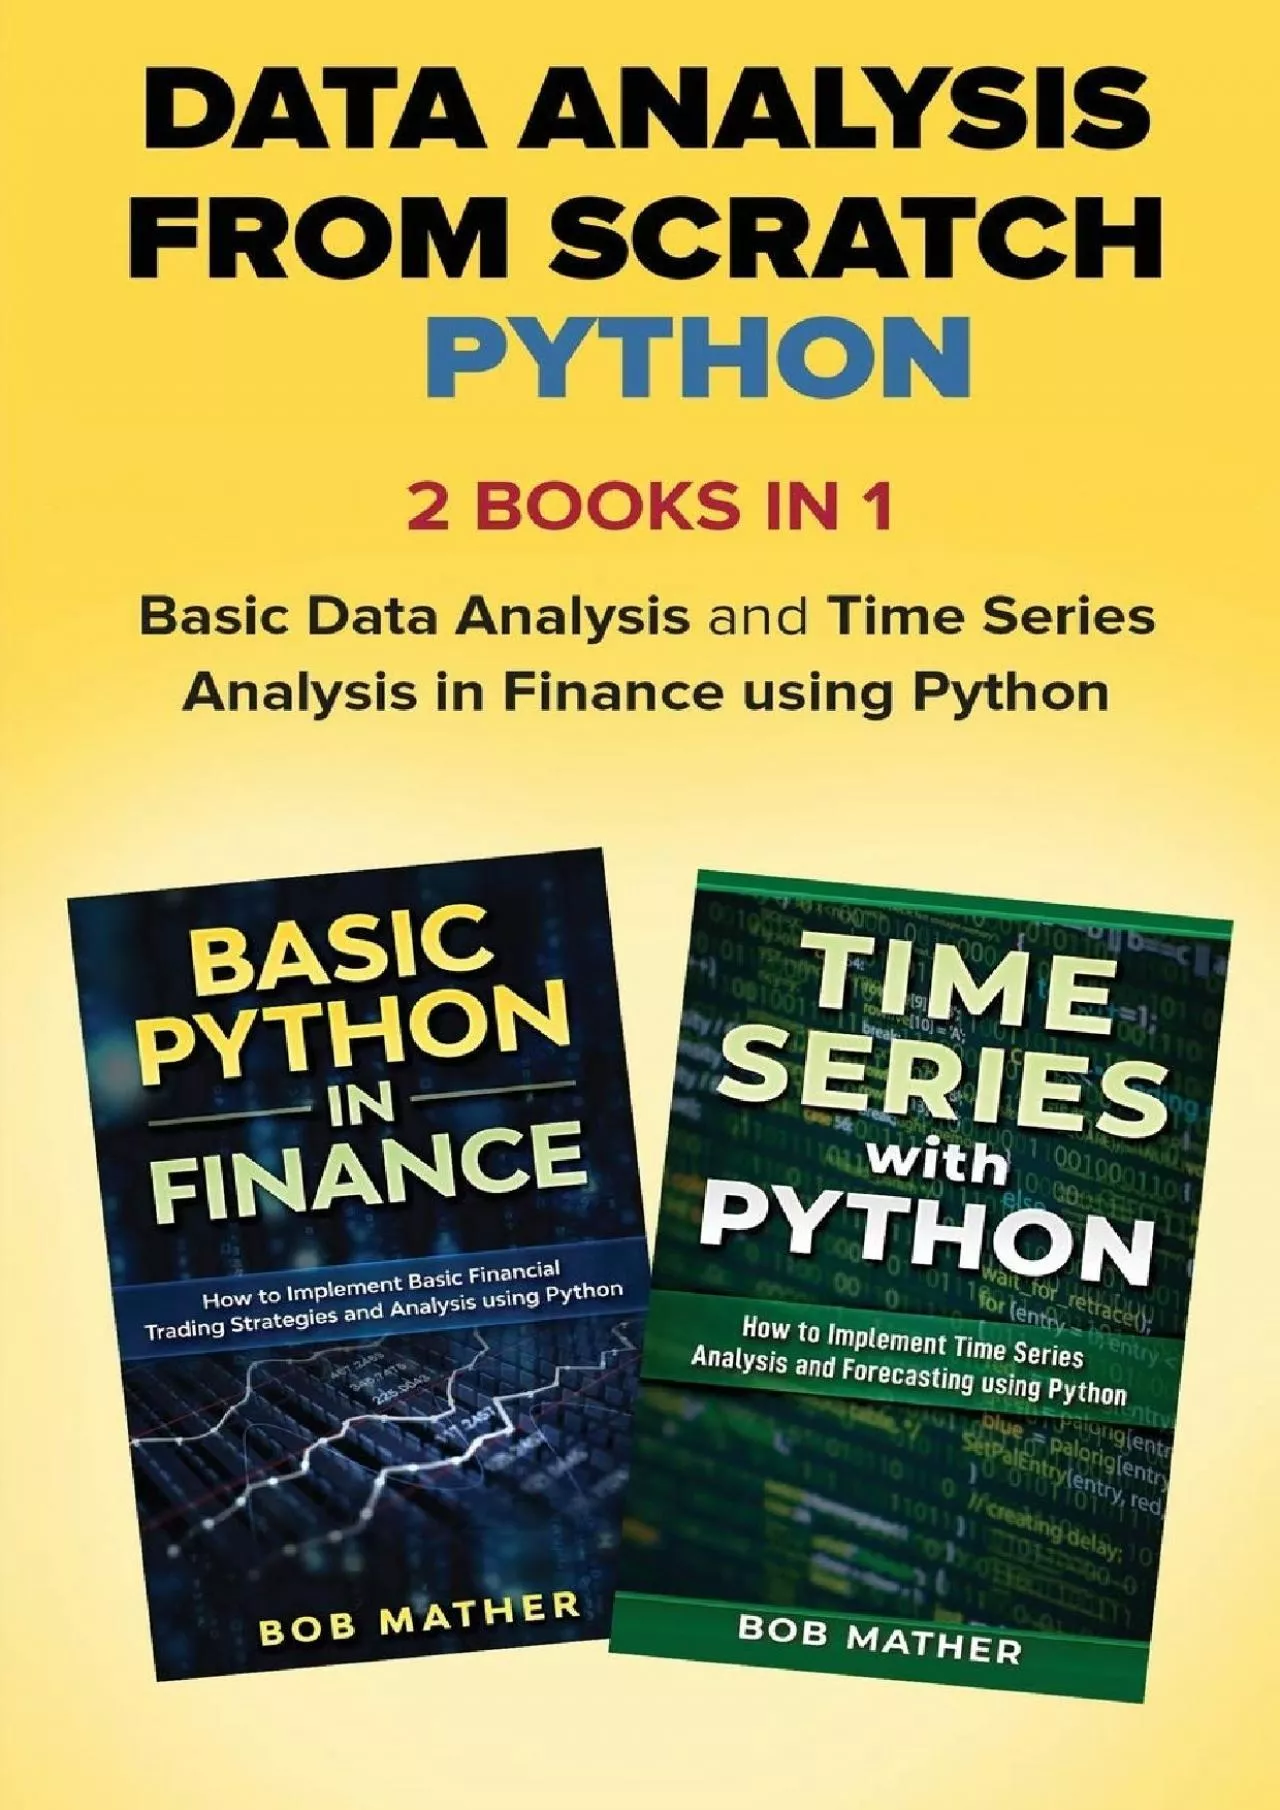 [BEST]-Data Analysis from Scratch with Python Bundle: Basic Data Analysis and Time Series